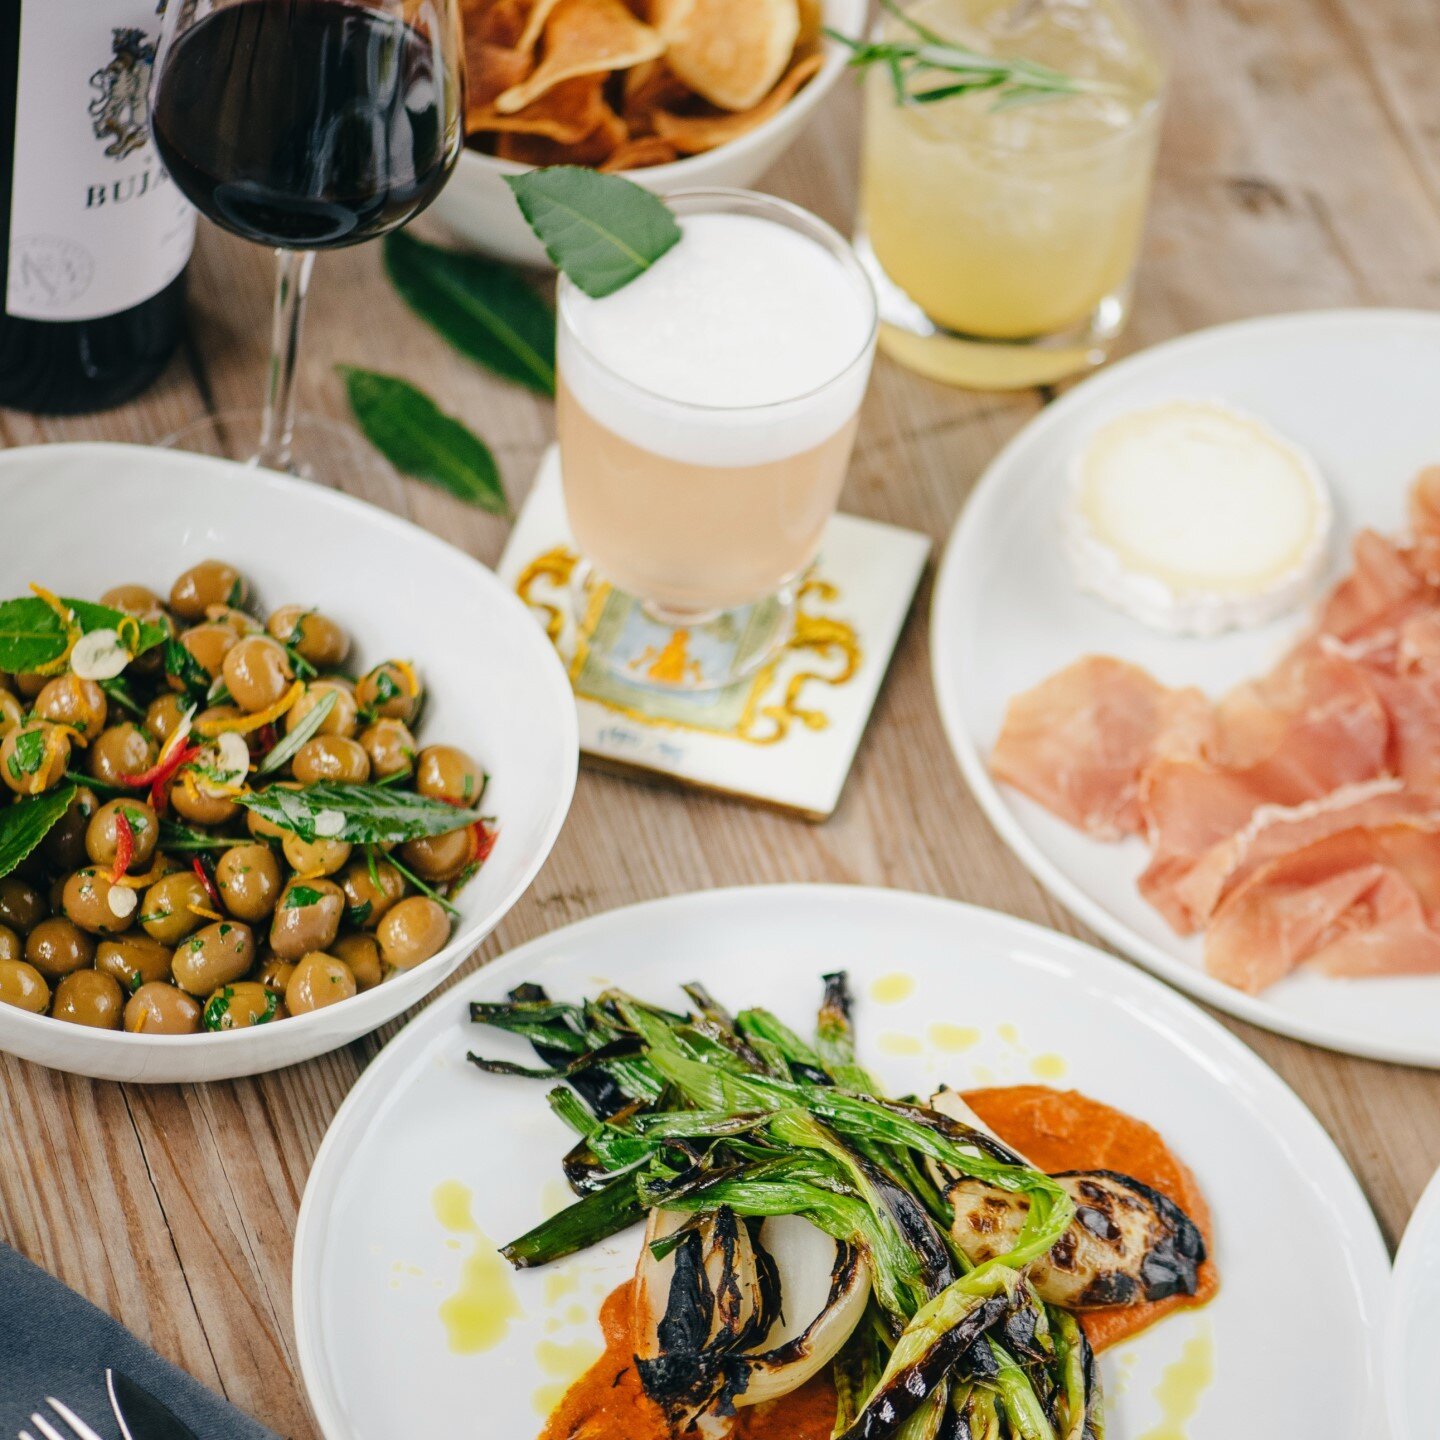 Have you dined with us yet? There are so many ways to experience Laurel. From stopping in for a quick cocktail to tasting our entire Tapas menu, there is something for everyone. Explore our full menus via the link in our bio! #laurelonrutledge